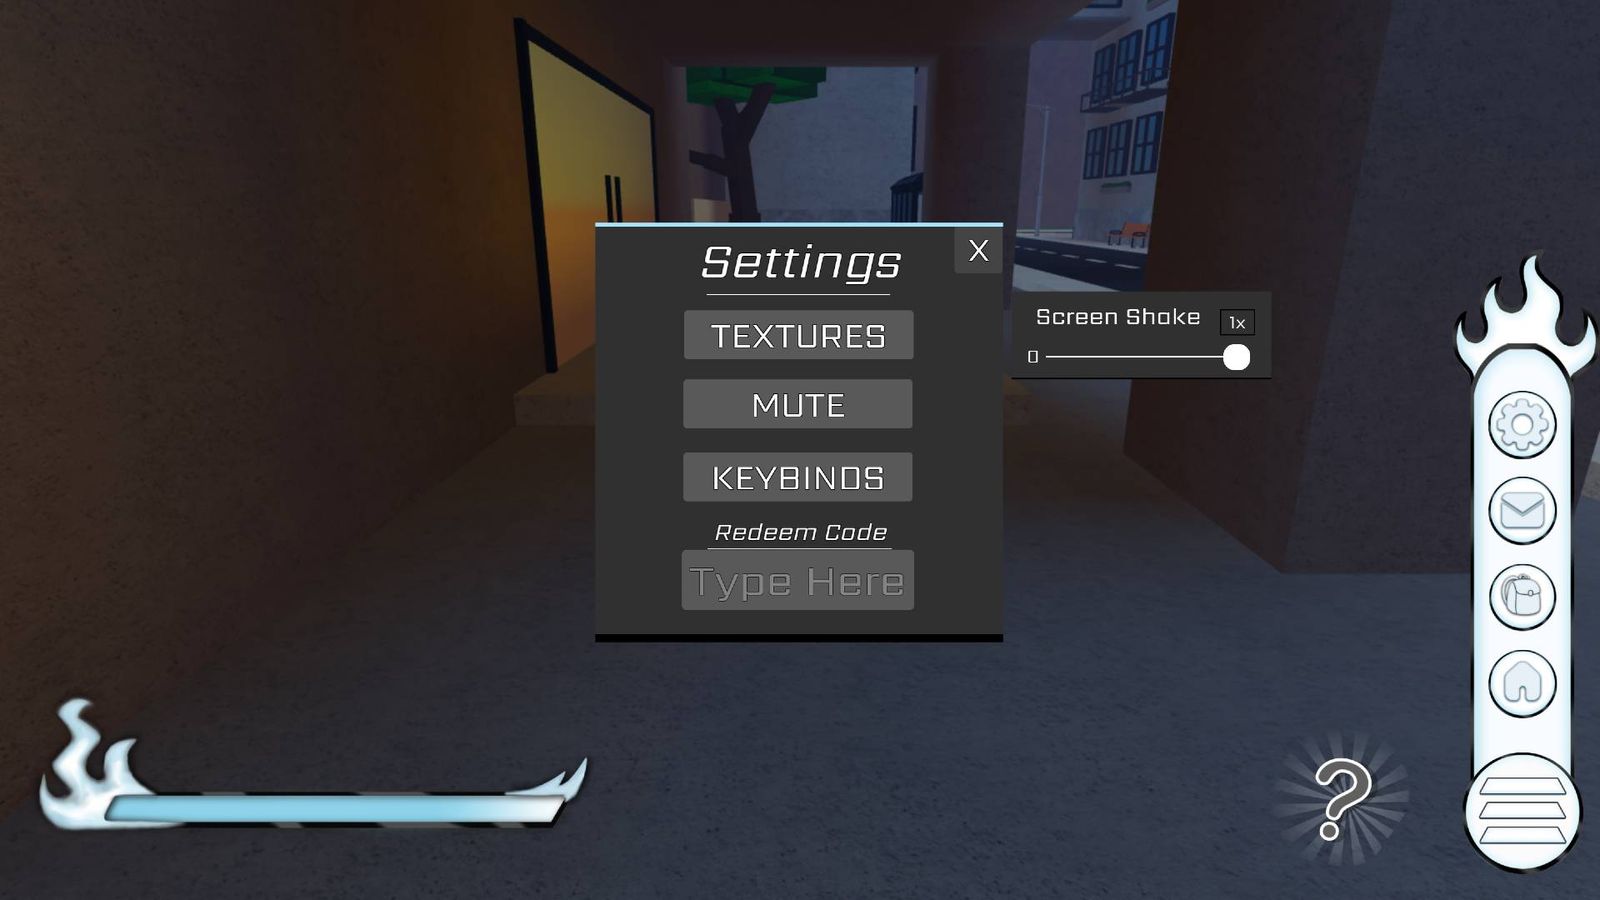 The code redemption screen in Soulz on Roblox.